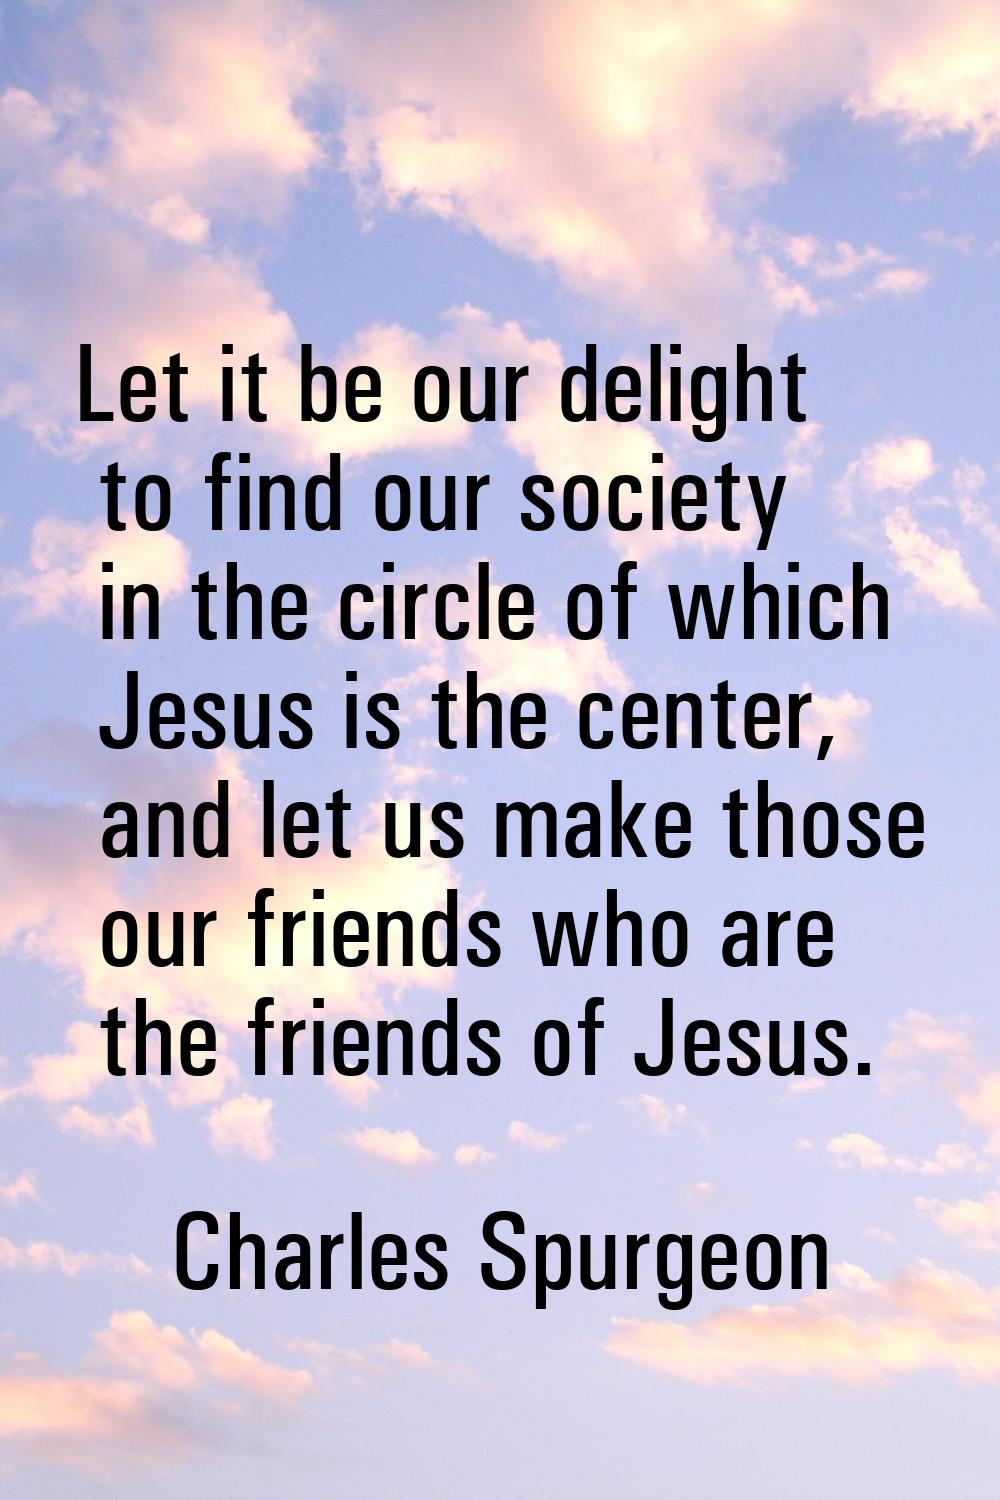 Let it be our delight to find our society in the circle of which Jesus is the center, and let us ma